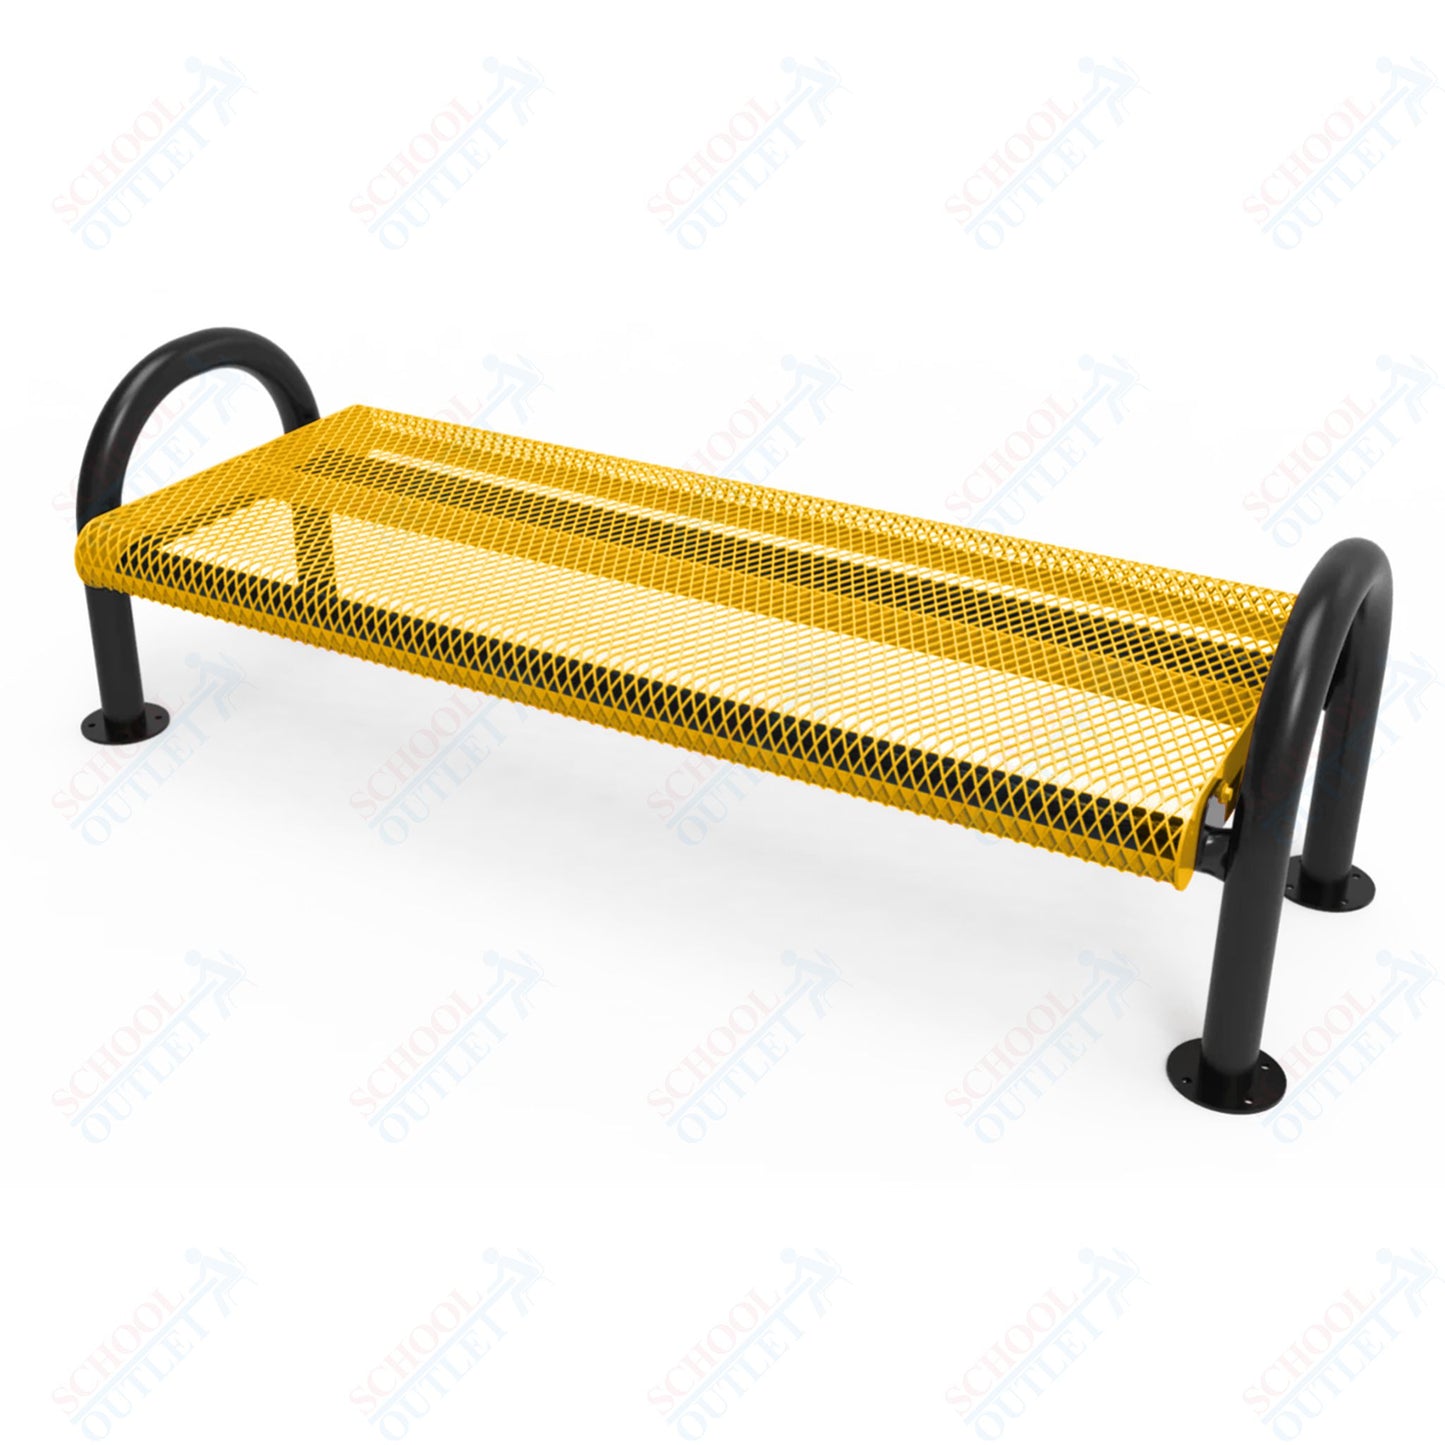 MyTcoat - Outdoor Bench without Back - Surface Mount 4' L (MYT-BMD04-60)